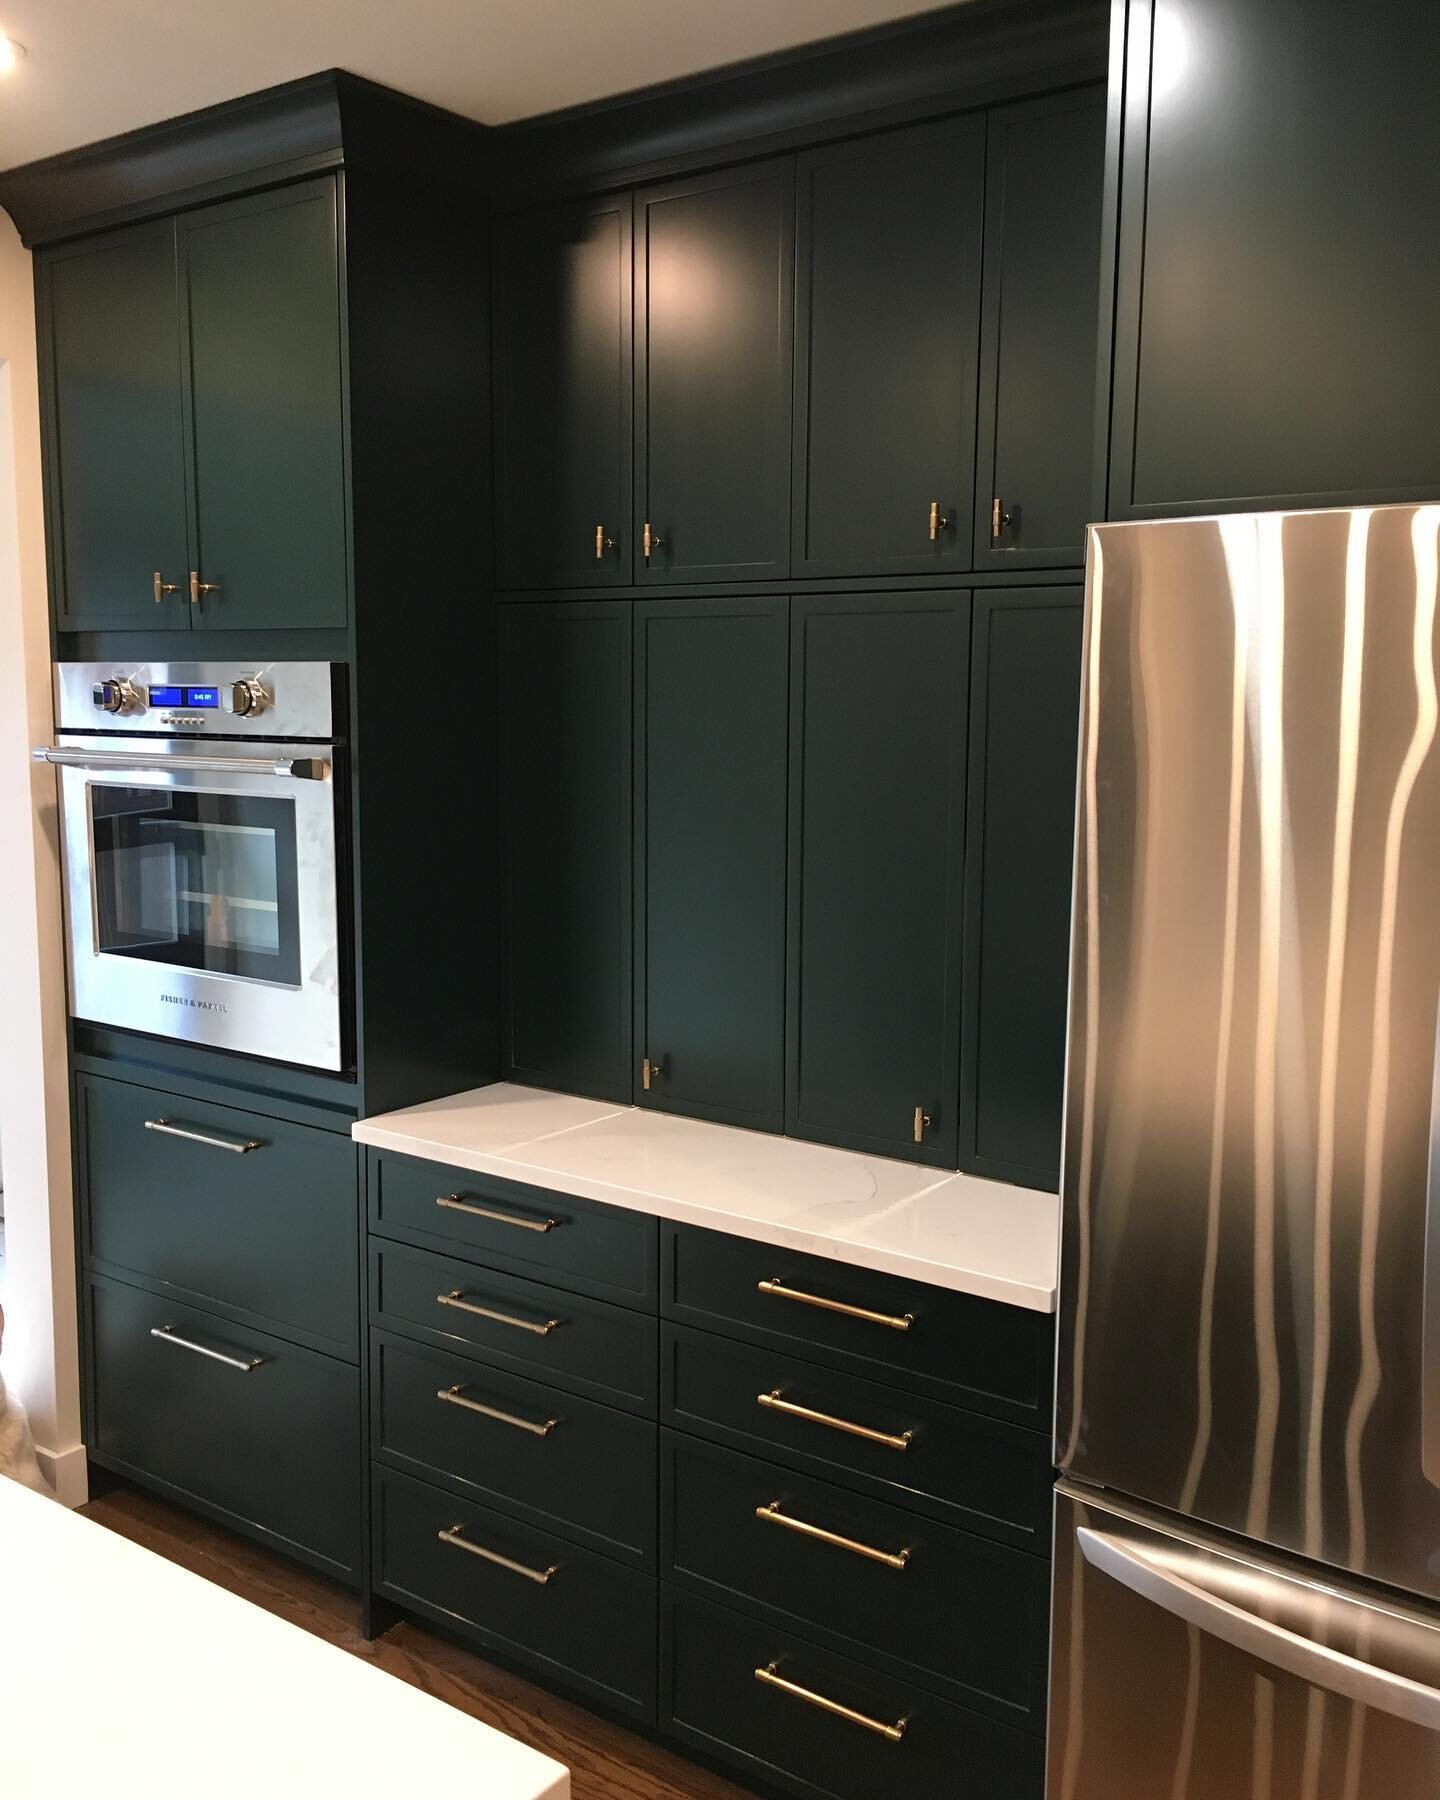 A nice little kitchen Reno we just wrapped up. More pics to come!
Thanks to @cassidy.woodcraft for your beautiful and detailed cabinet work! The clients couldn&rsquo;t be happier!